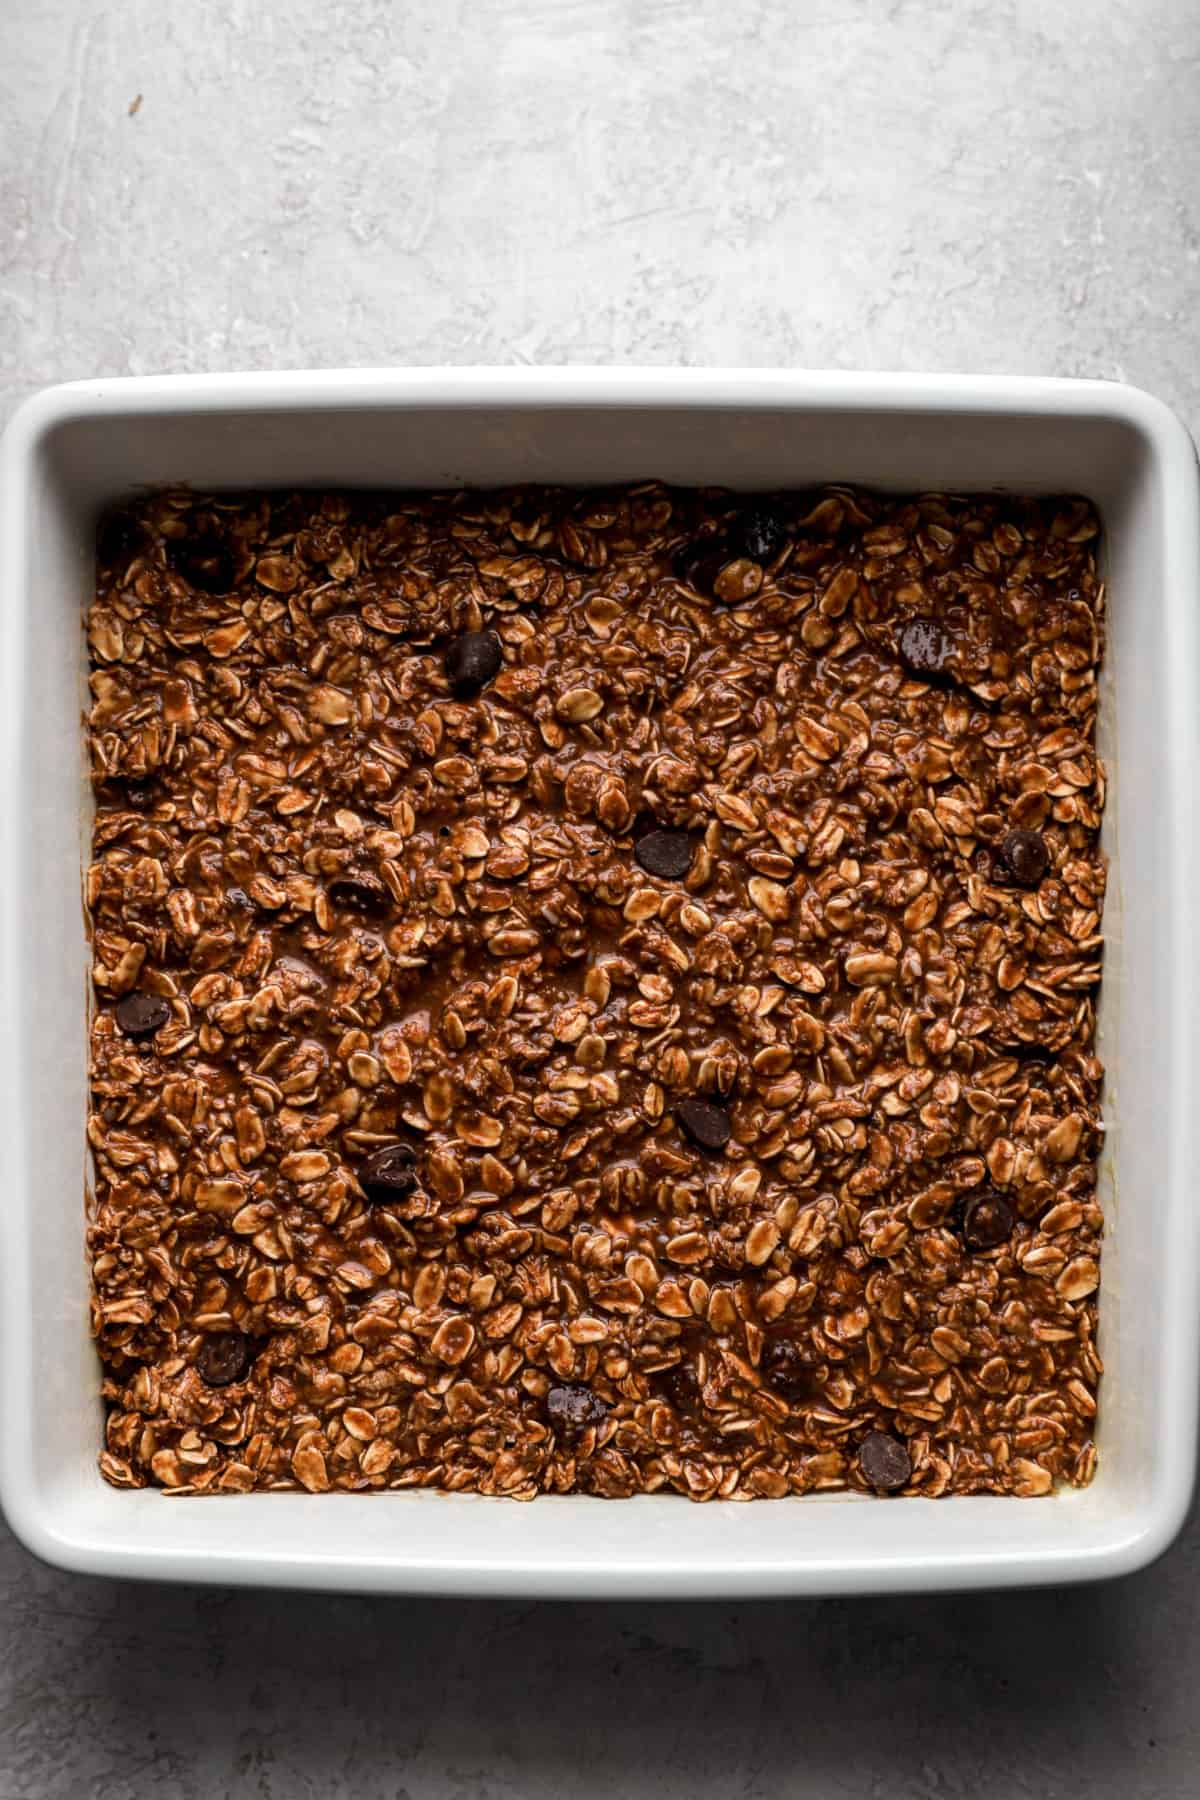 chocolate oats in a baking dish.